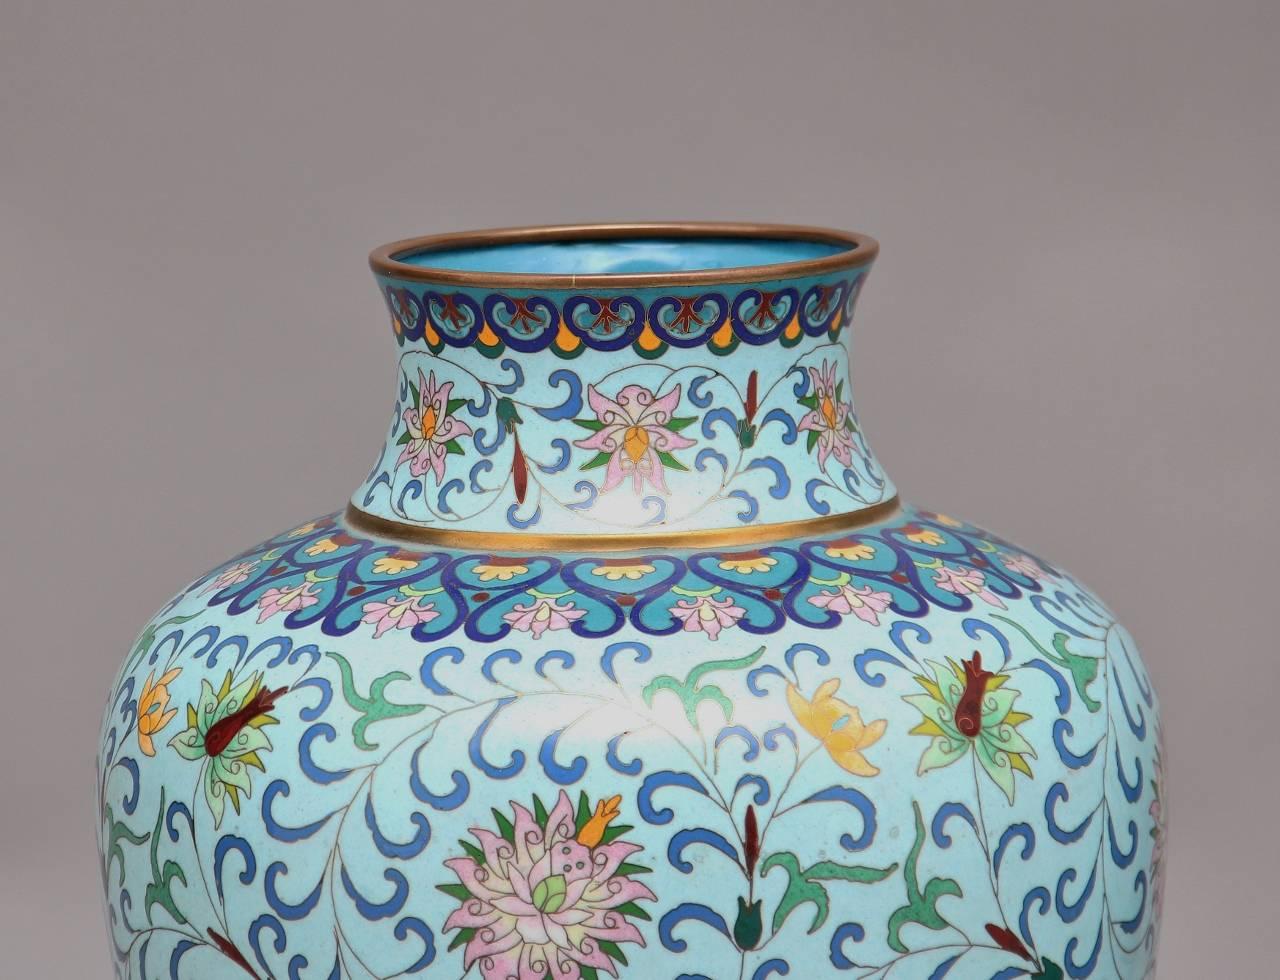 A pair of 20th century Chinese cloisonné enamel vases decorated in a lovely floral pattern, both vases in excellent condition

Foreign influence contributed to the development of cloisonné during the early 14th-15th century in China. The earliest